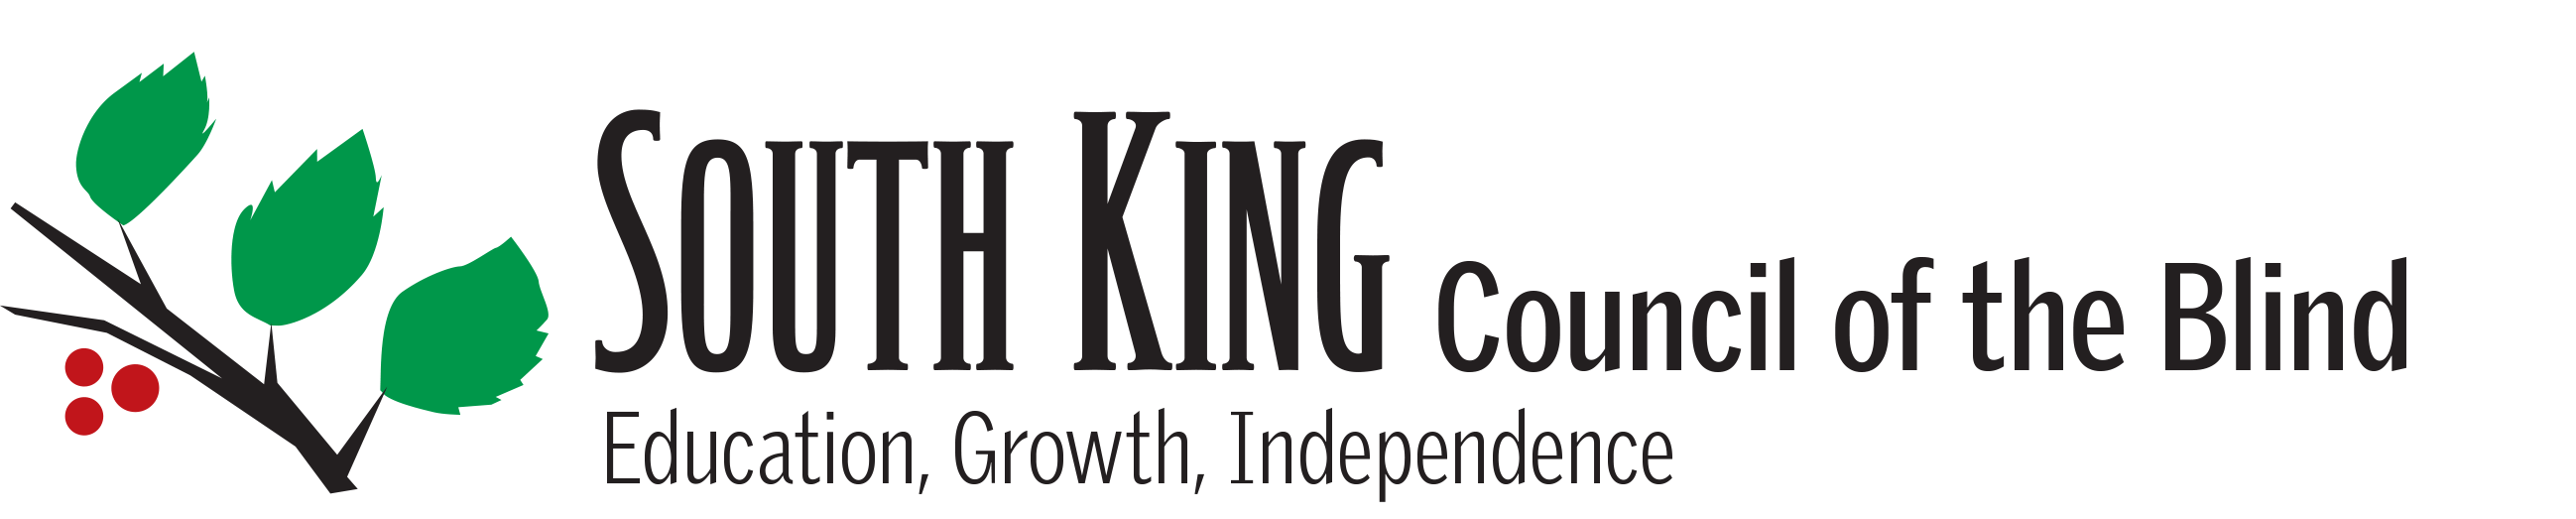 South King Council of the Blind logo. Motto: Education, Growth, Independence